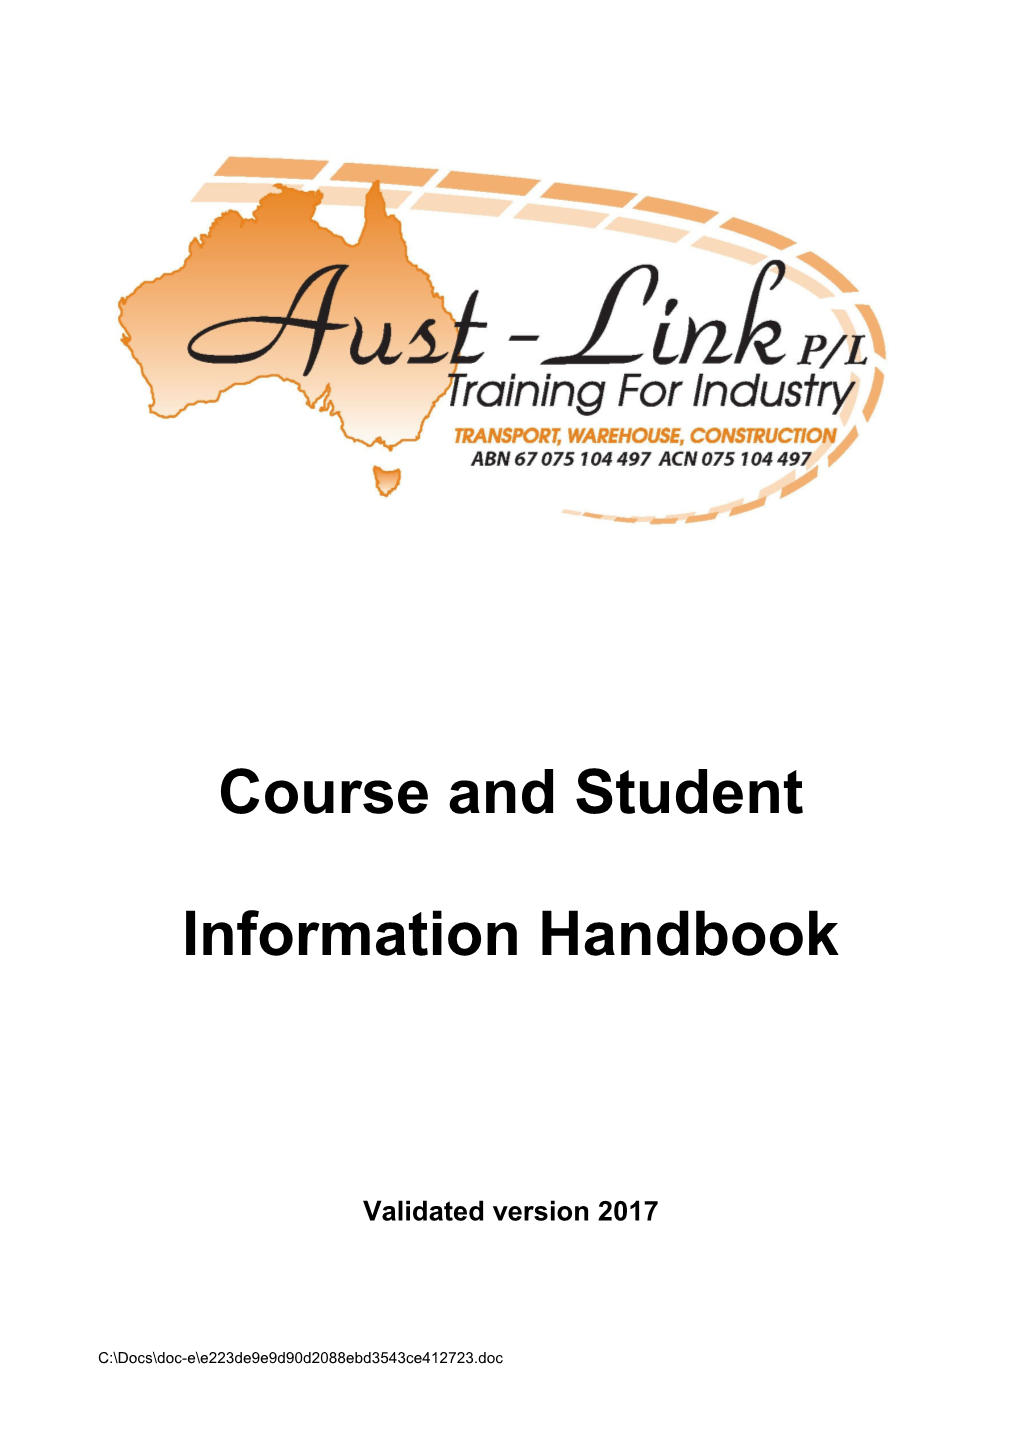 Course and Student Information Handbook